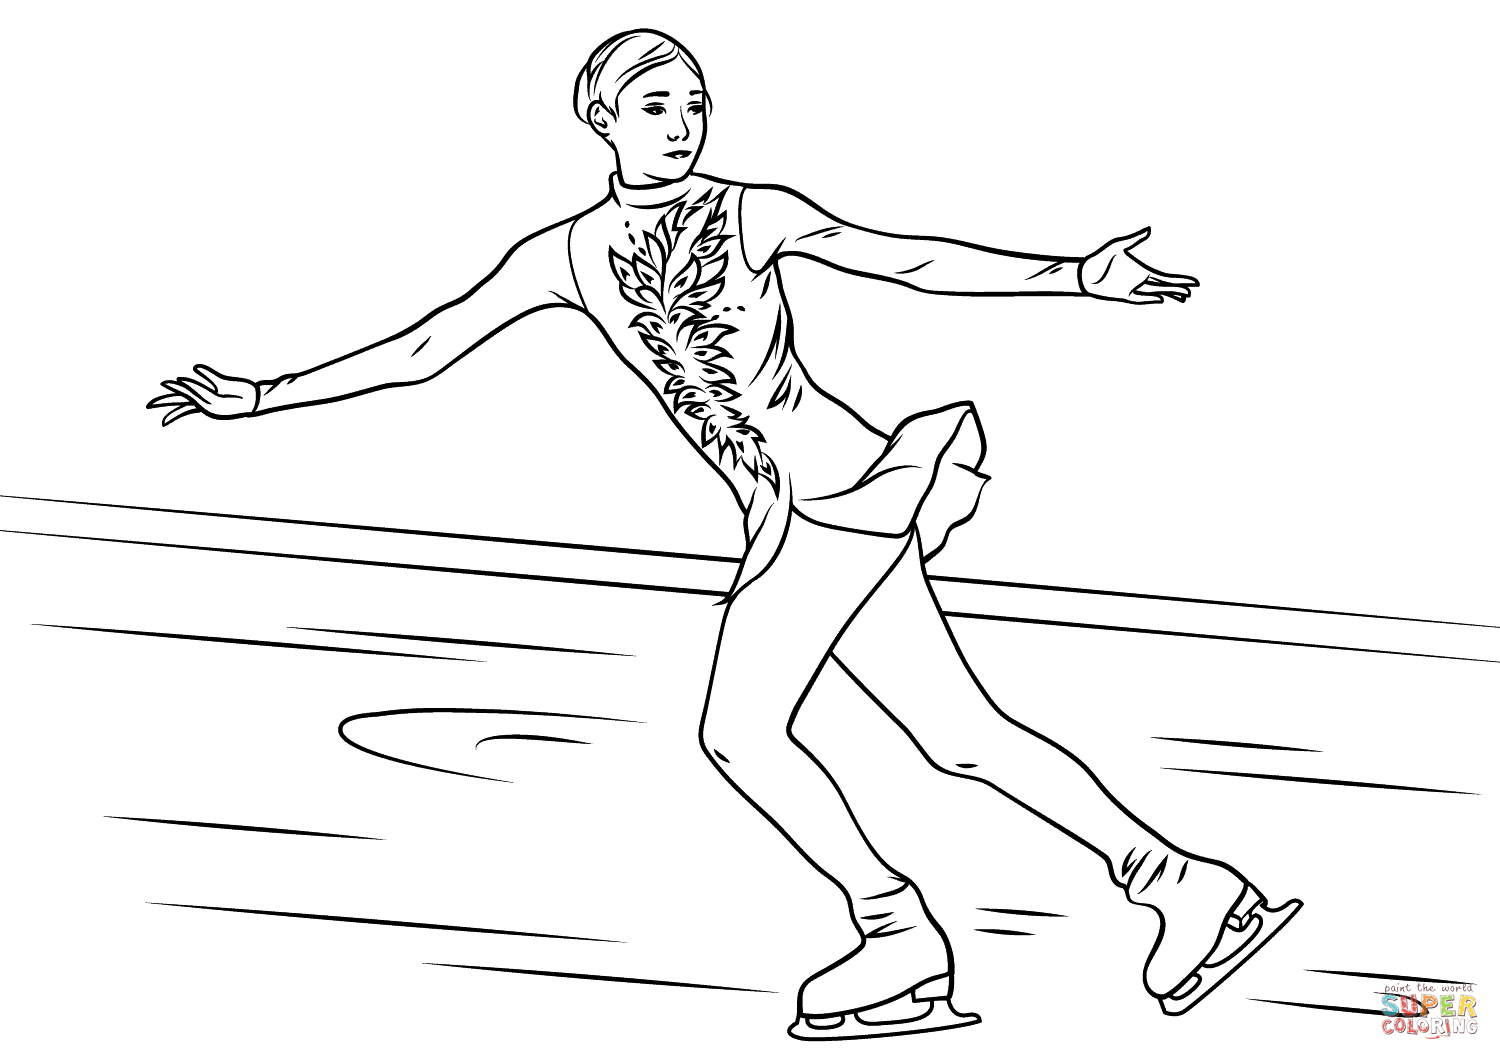 Ice Skater coloring page | Free Printable Coloring Pages